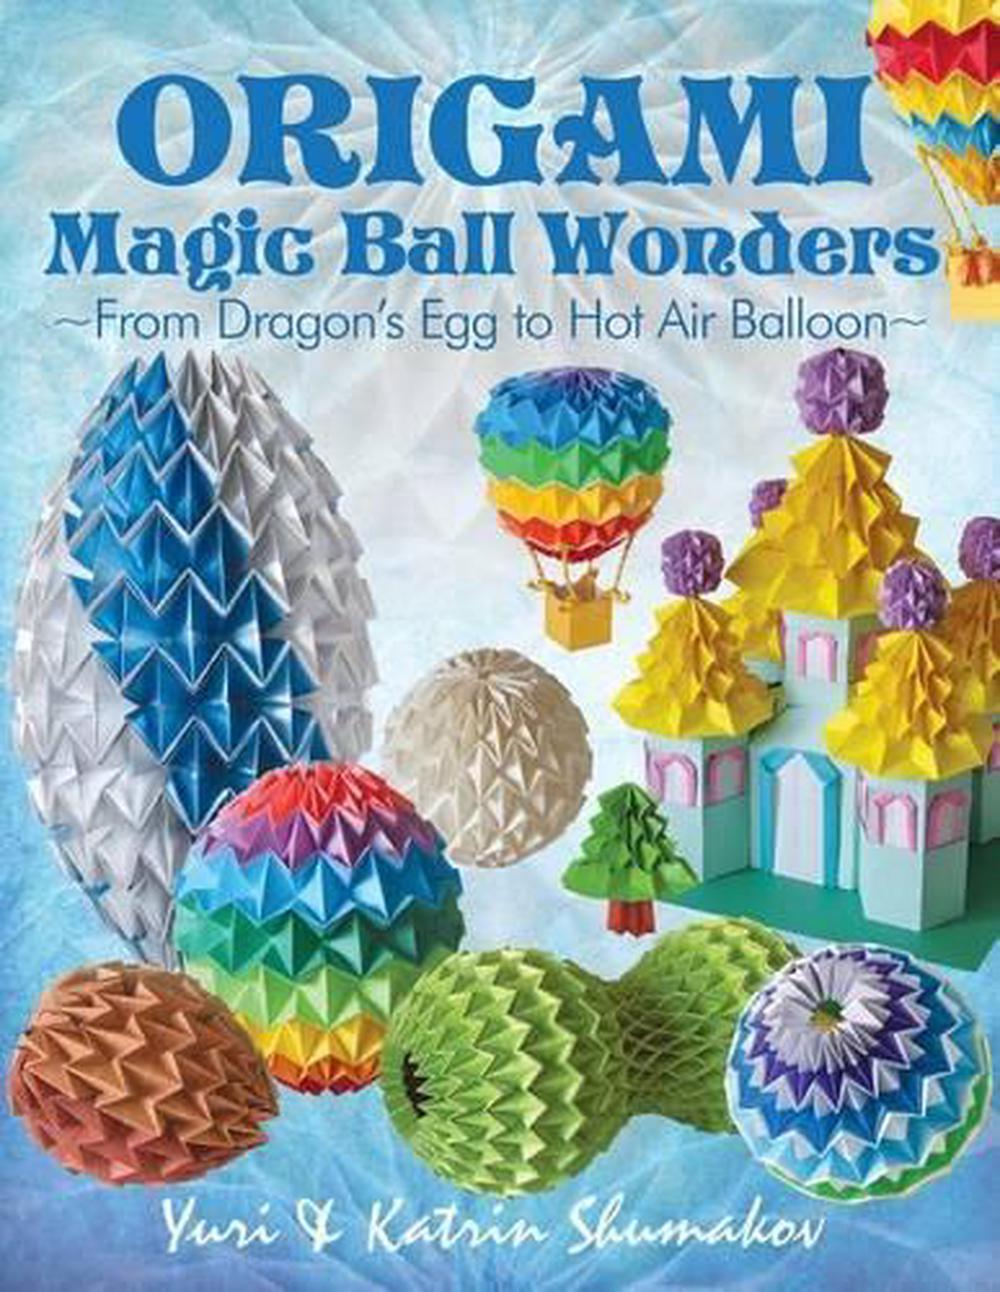 Details About Origami Magic Ball Wonders From Dragons Egg To Hot Air Balloon By Yuri Shumako